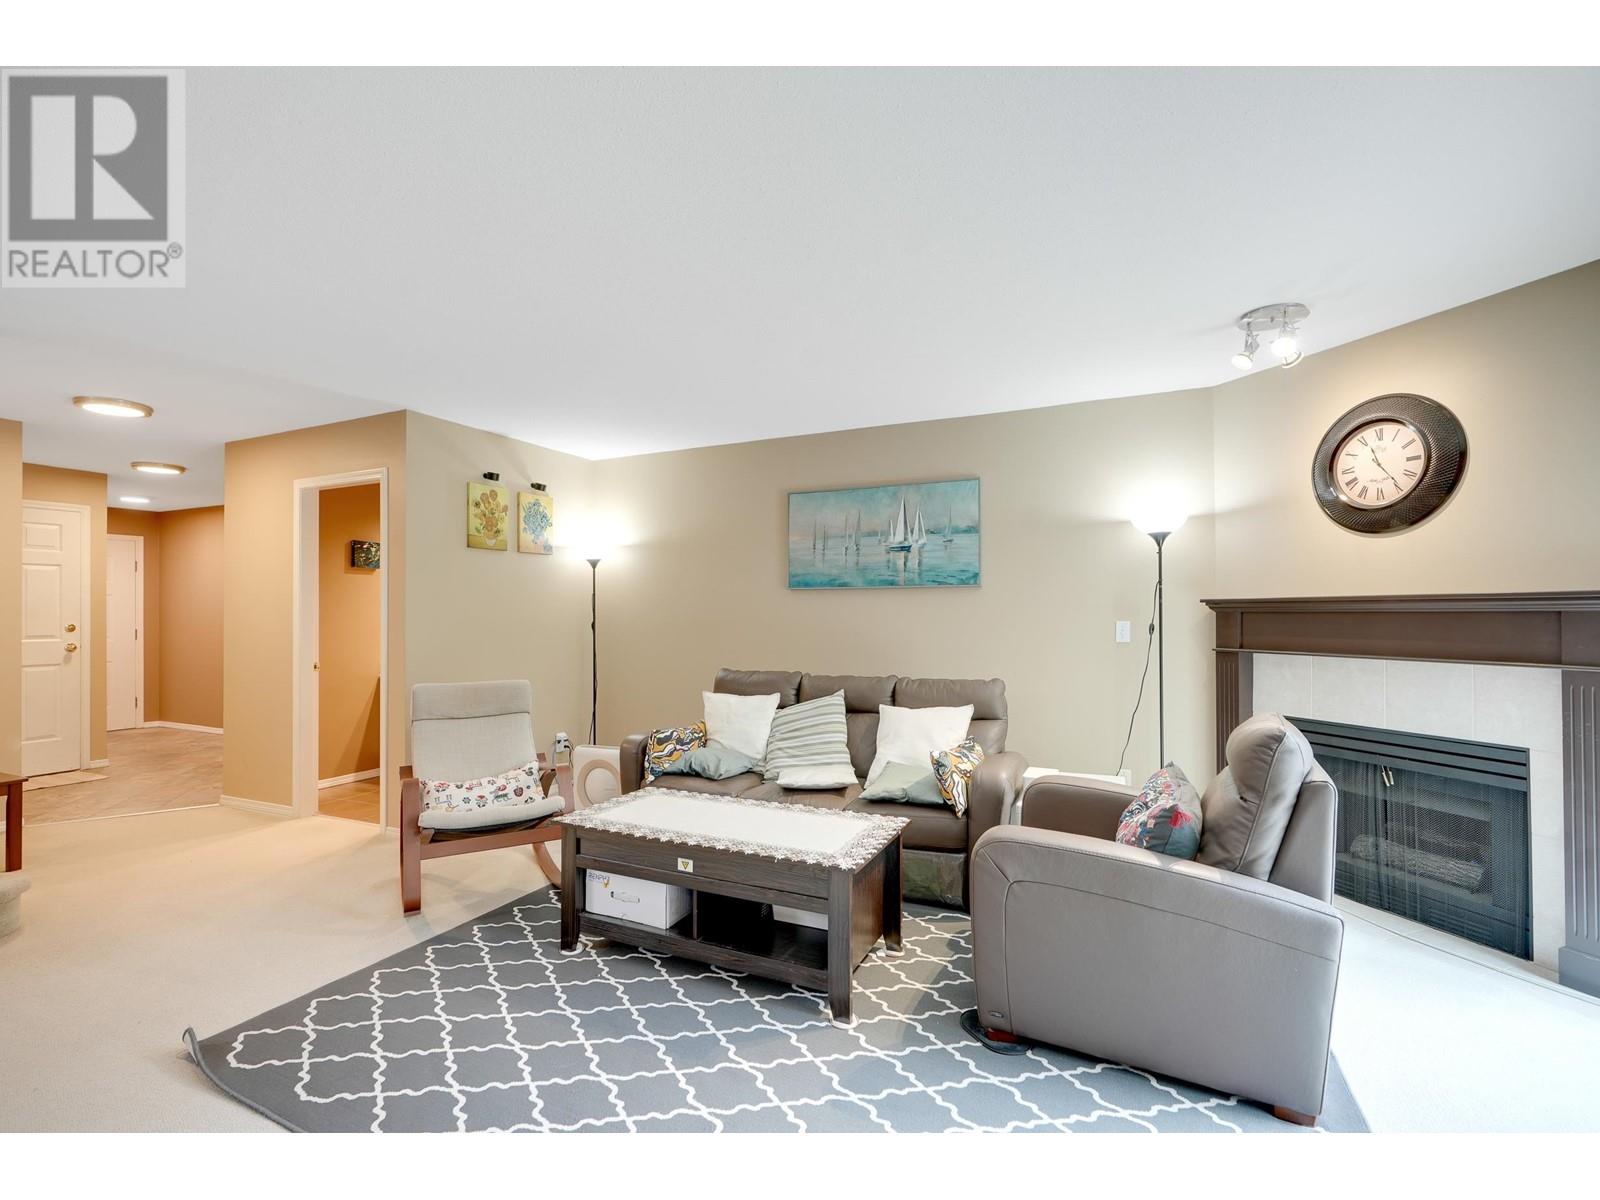 21 103 PARKSIDE DRIVE, Port Moody